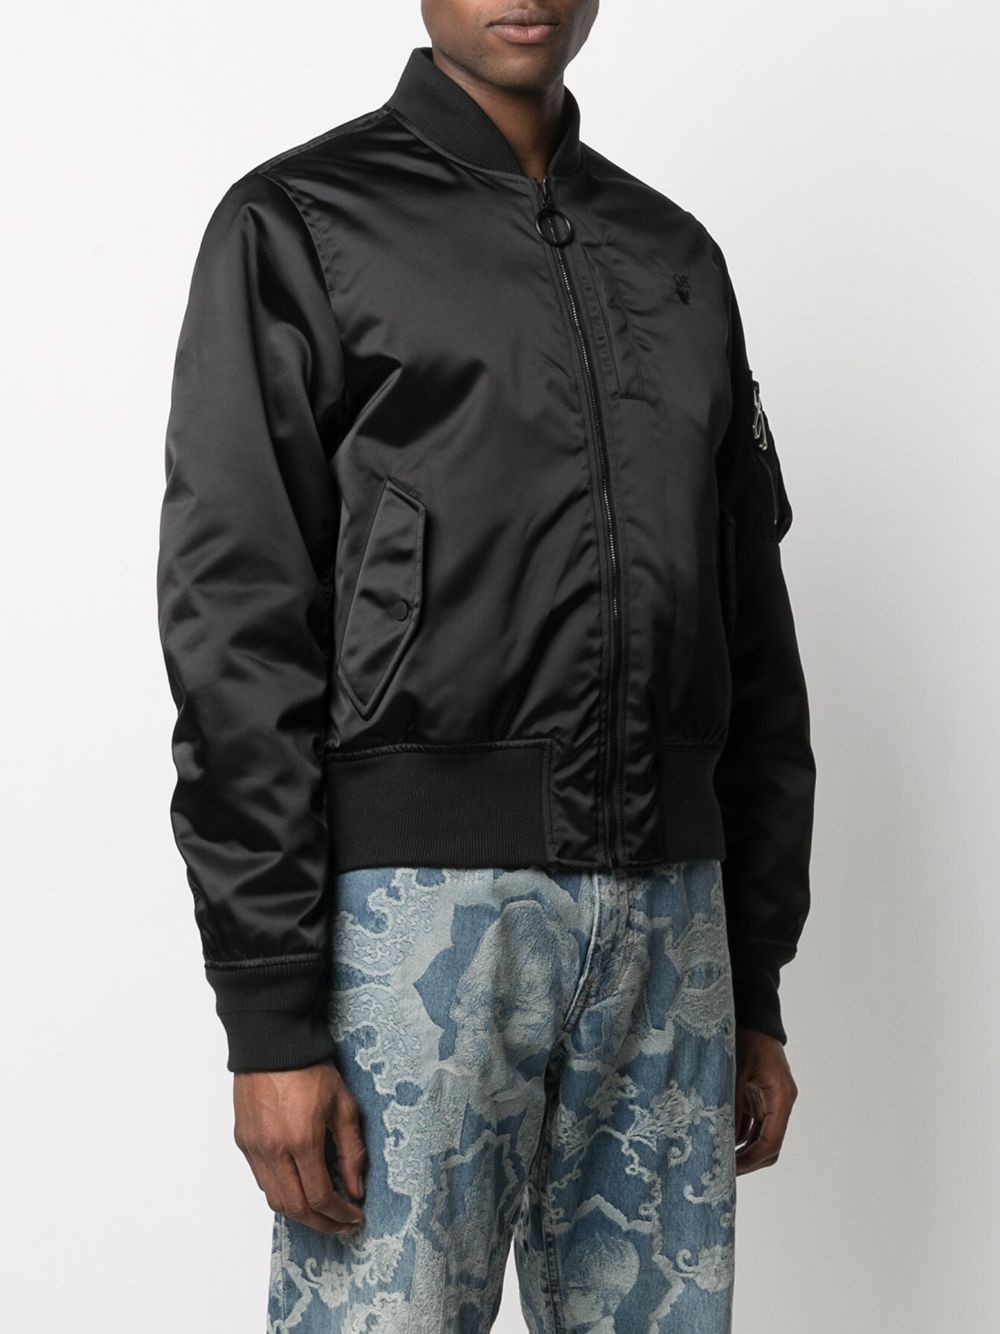 Off-White Hand Off zip-up Bomber Jacket - Farfetch